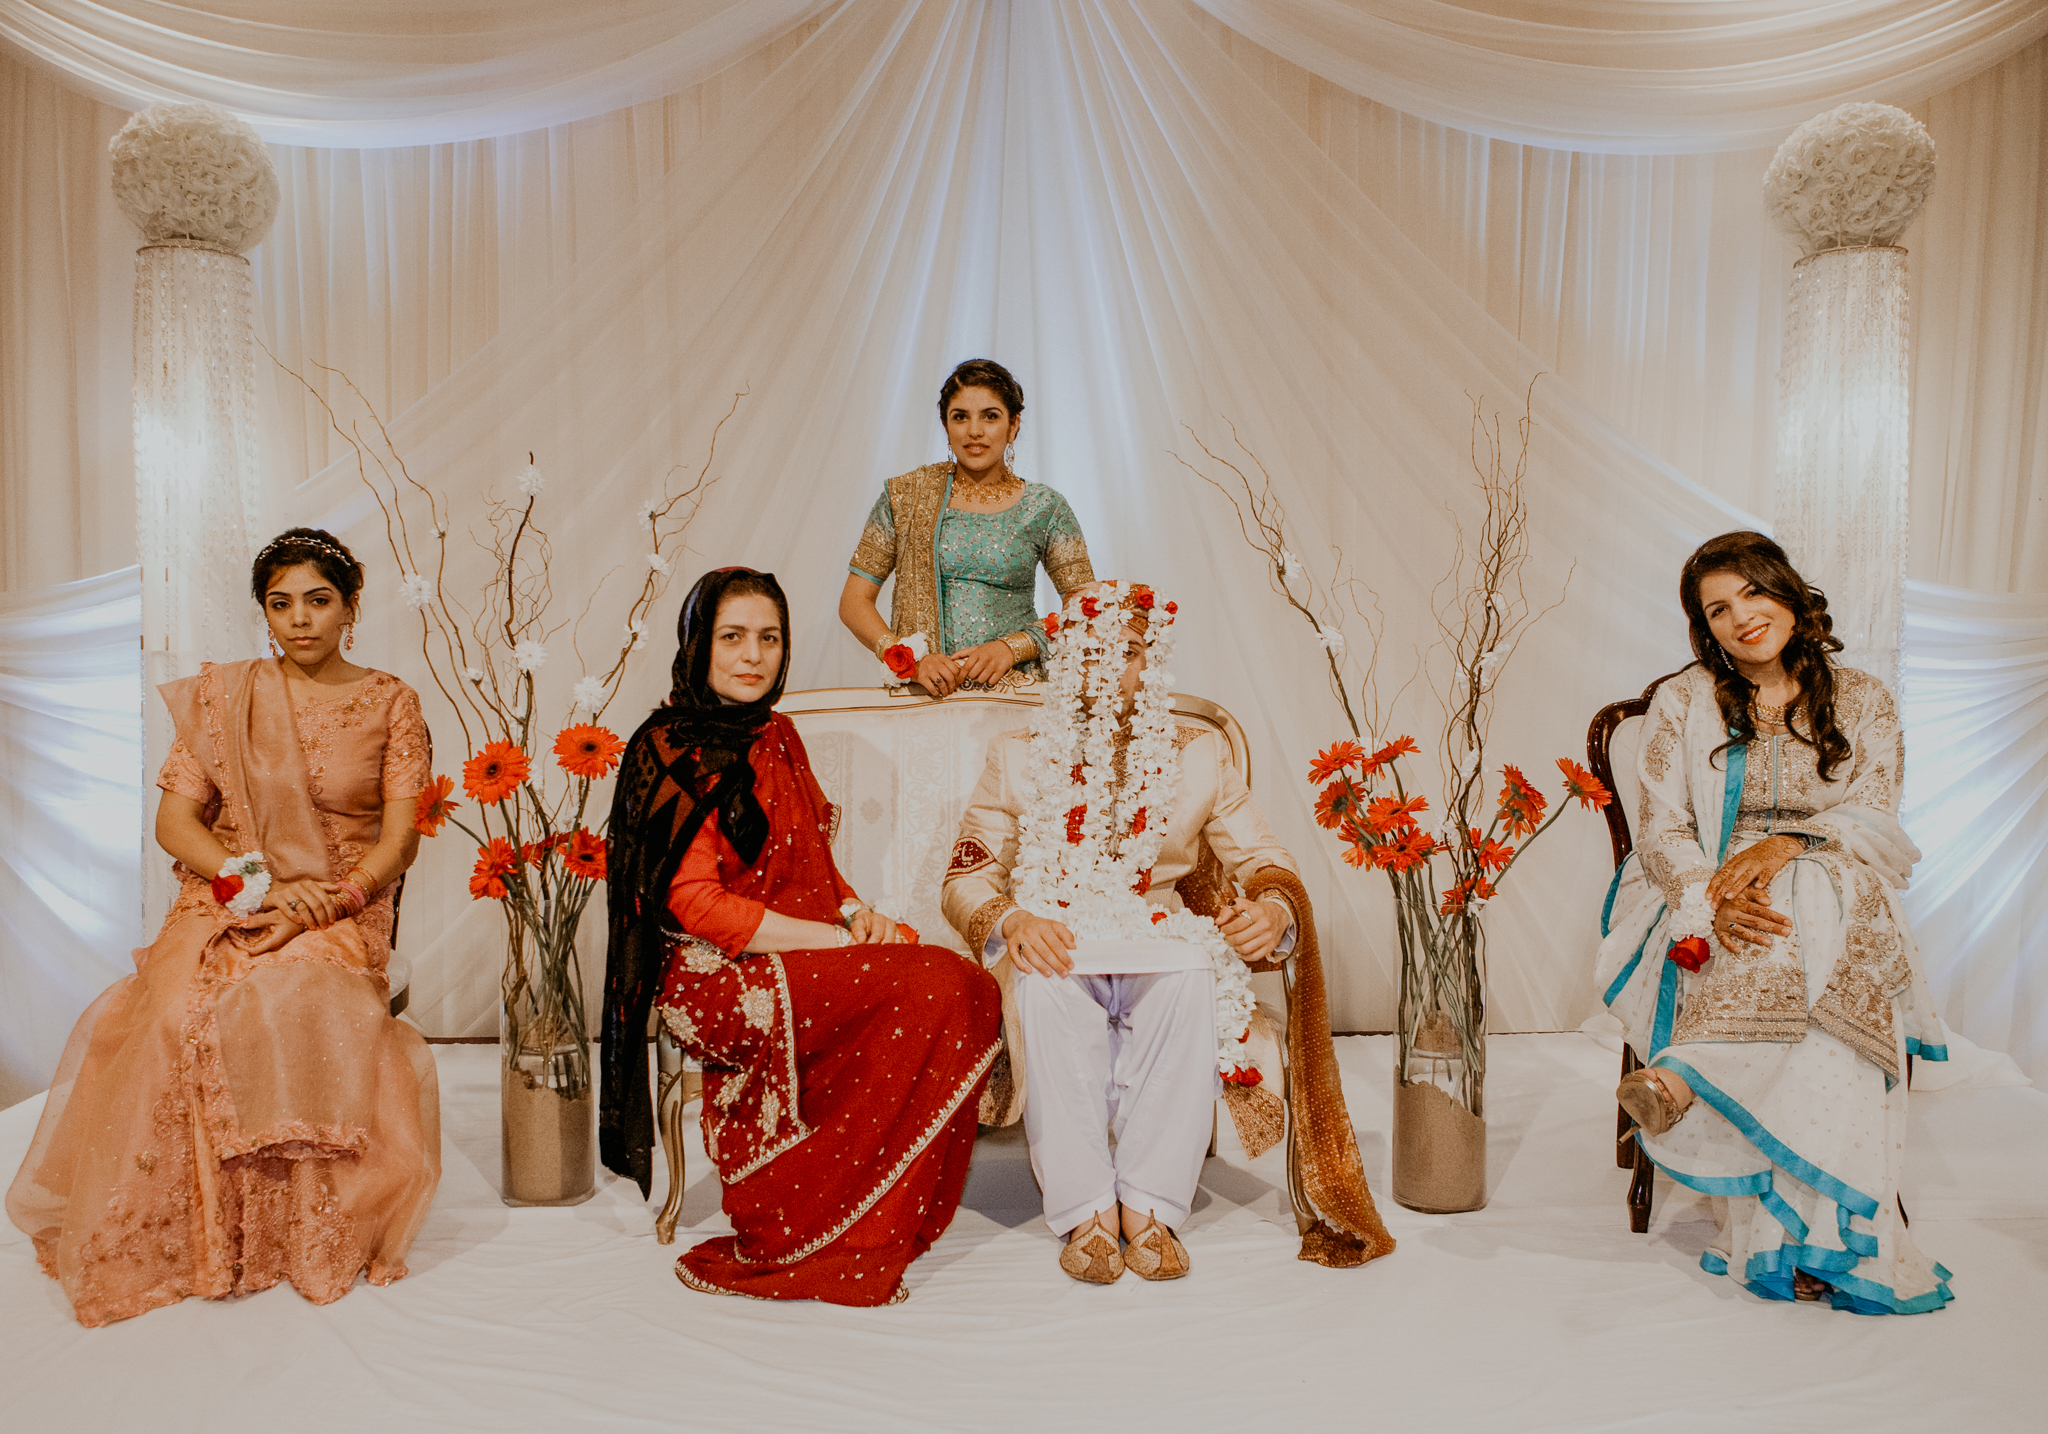 Family portrait with Indian groom in flower veil